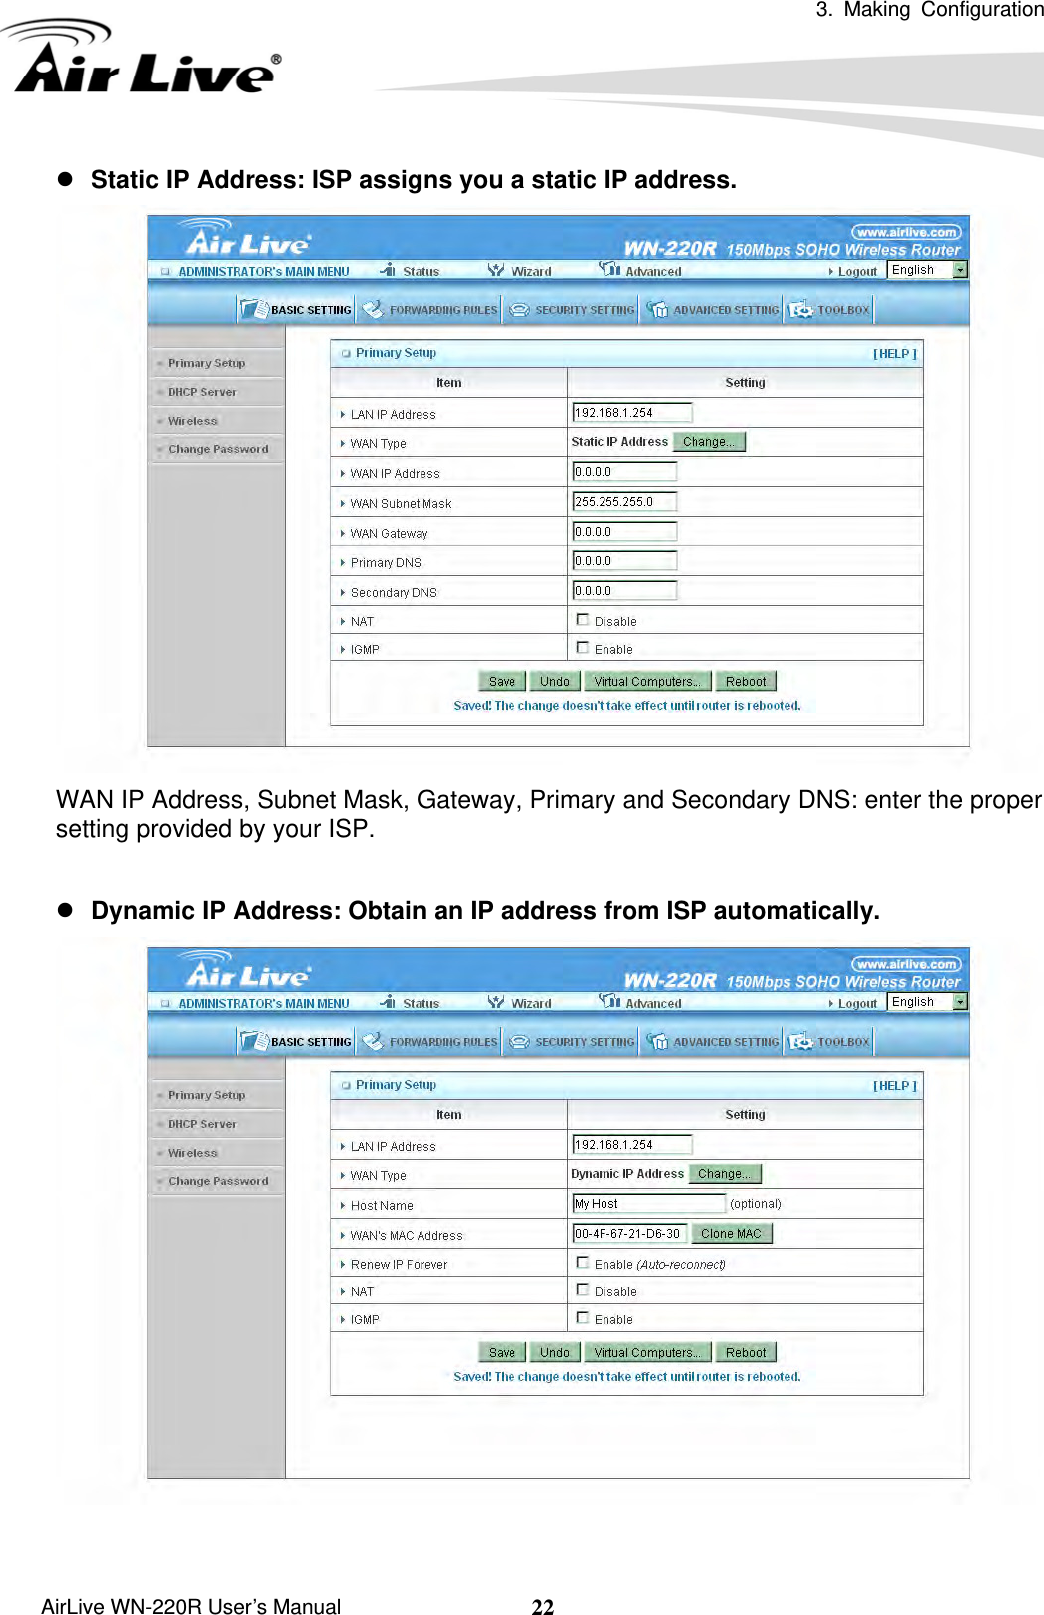  3. Making Configuration       AirLive WN-220R User’s Manual  22z Static IP Address: ISP assigns you a static IP address.  WAN IP Address, Subnet Mask, Gateway, Primary and Secondary DNS: enter the proper setting provided by your ISP.  z Dynamic IP Address: Obtain an IP address from ISP automatically.  